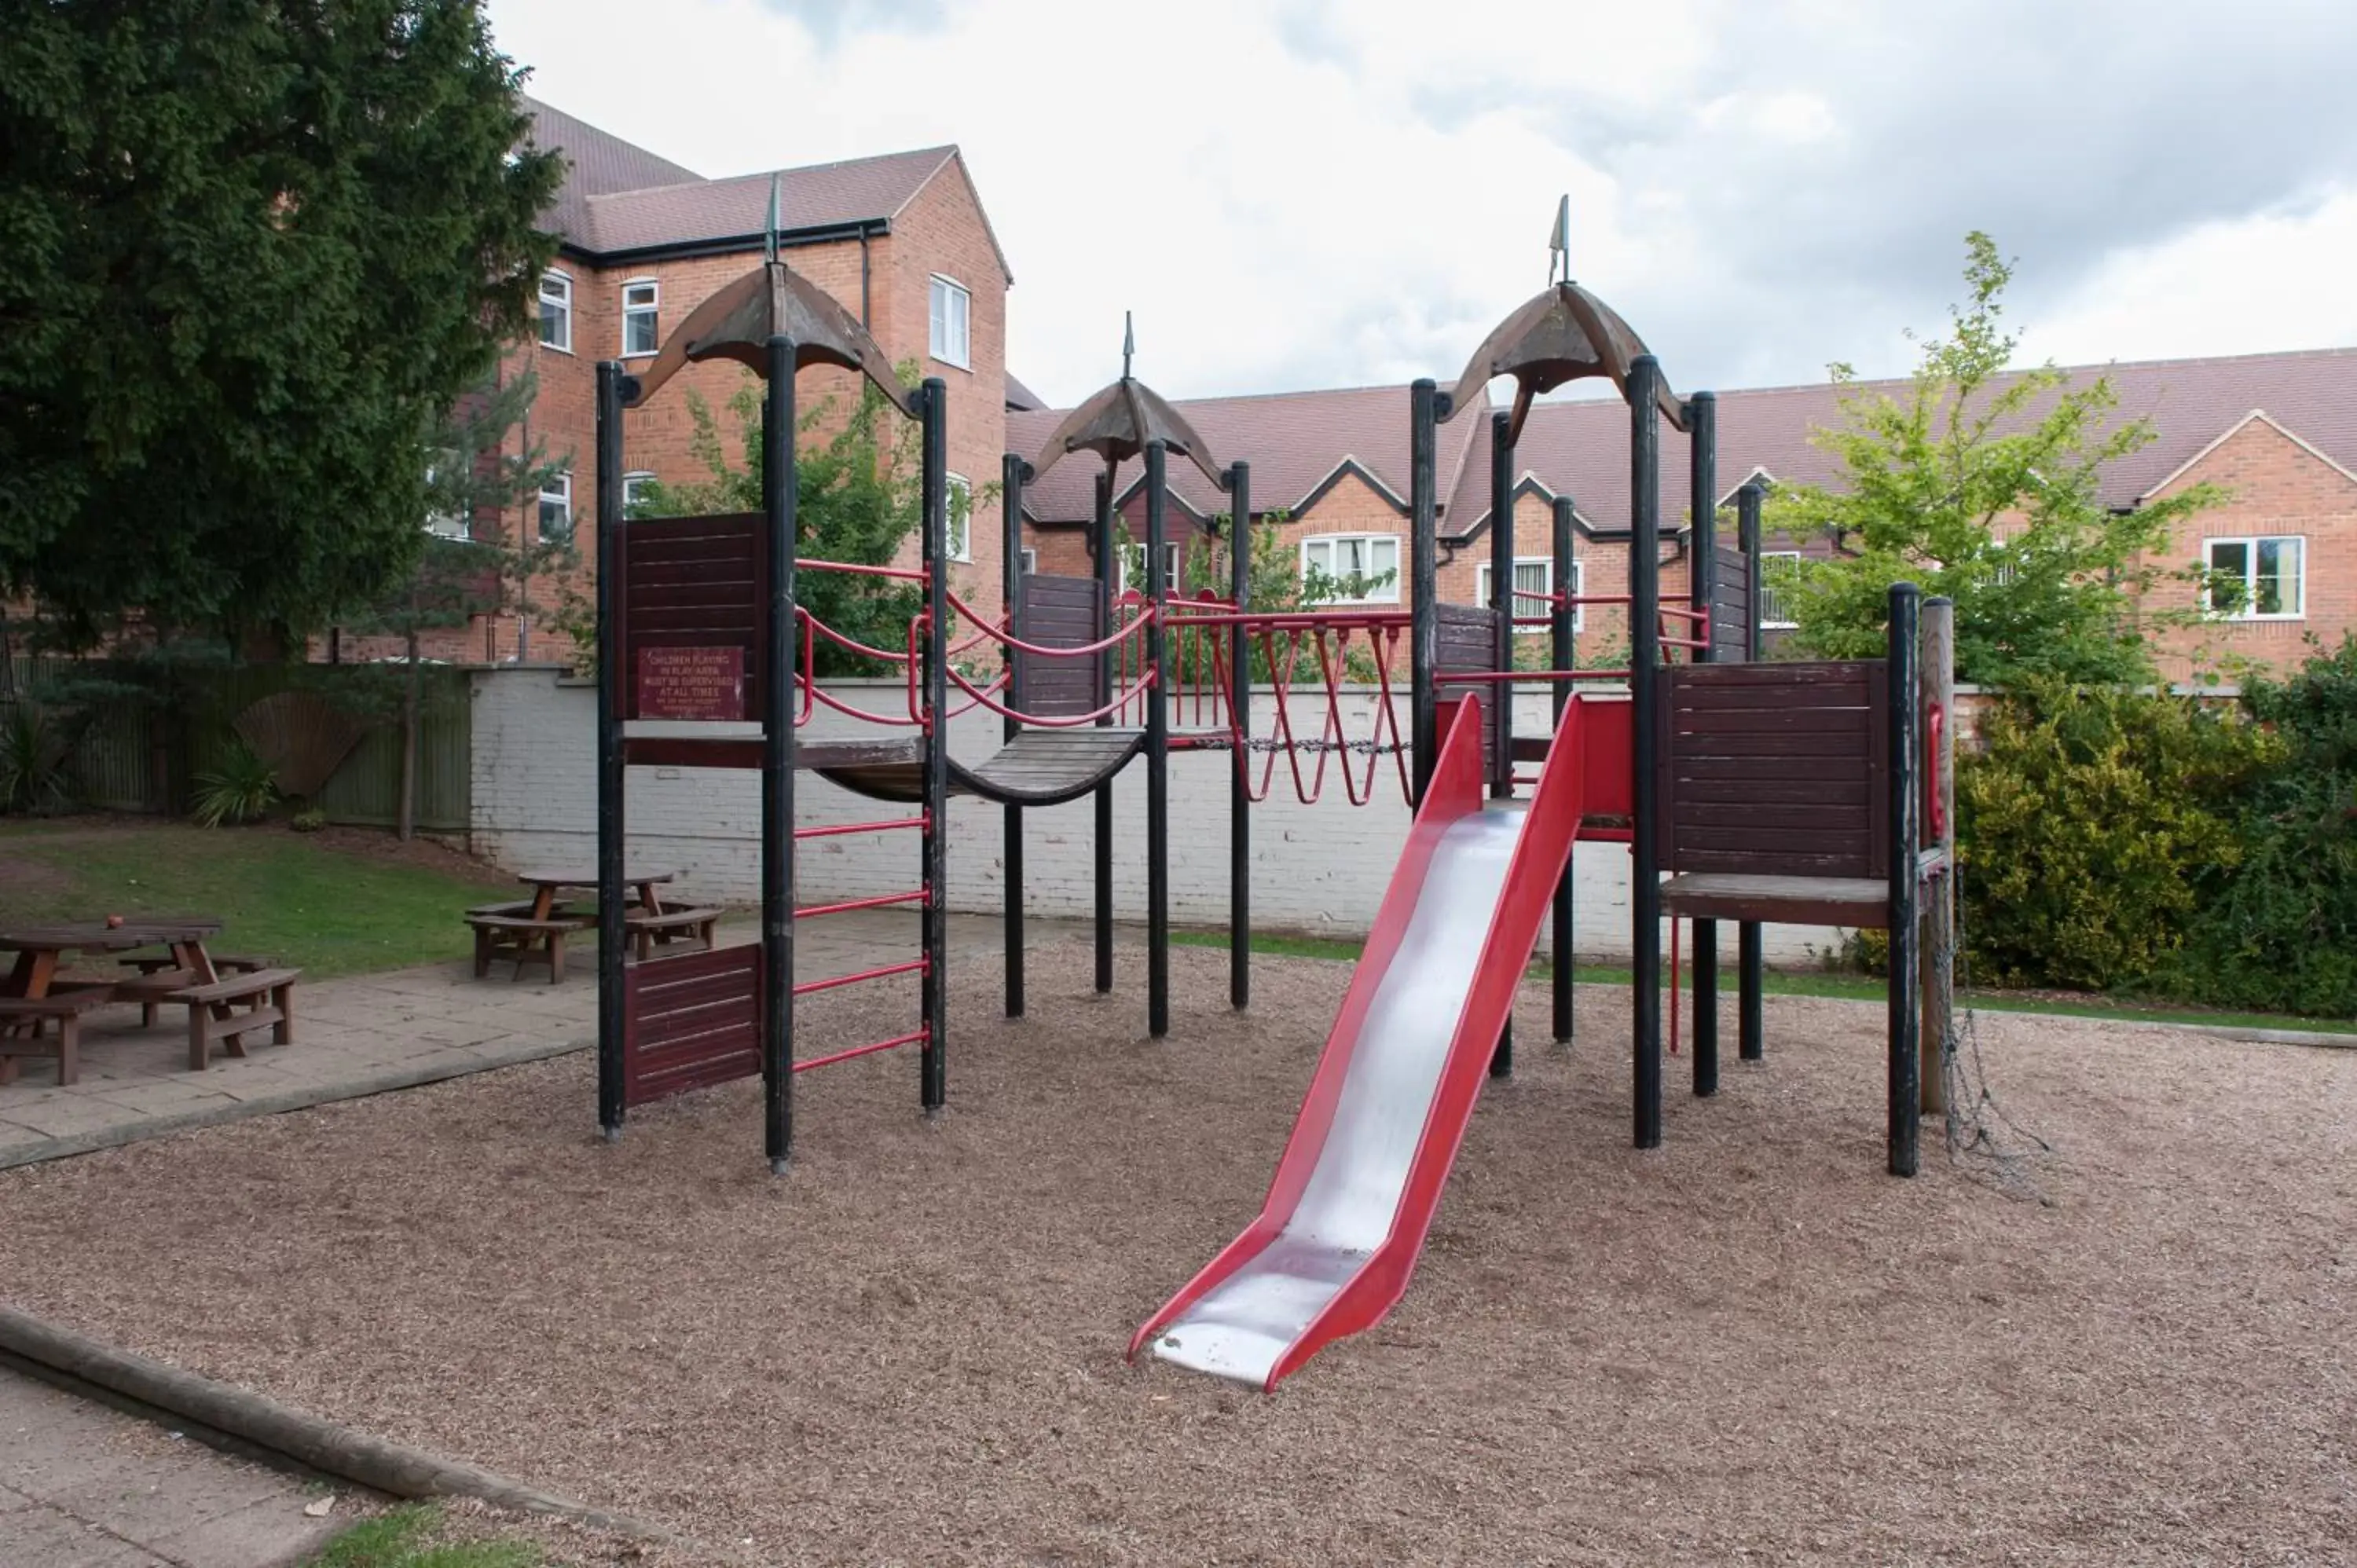 Children play ground, Children's Play Area in Heart of England, Northampton by Marston's Inns